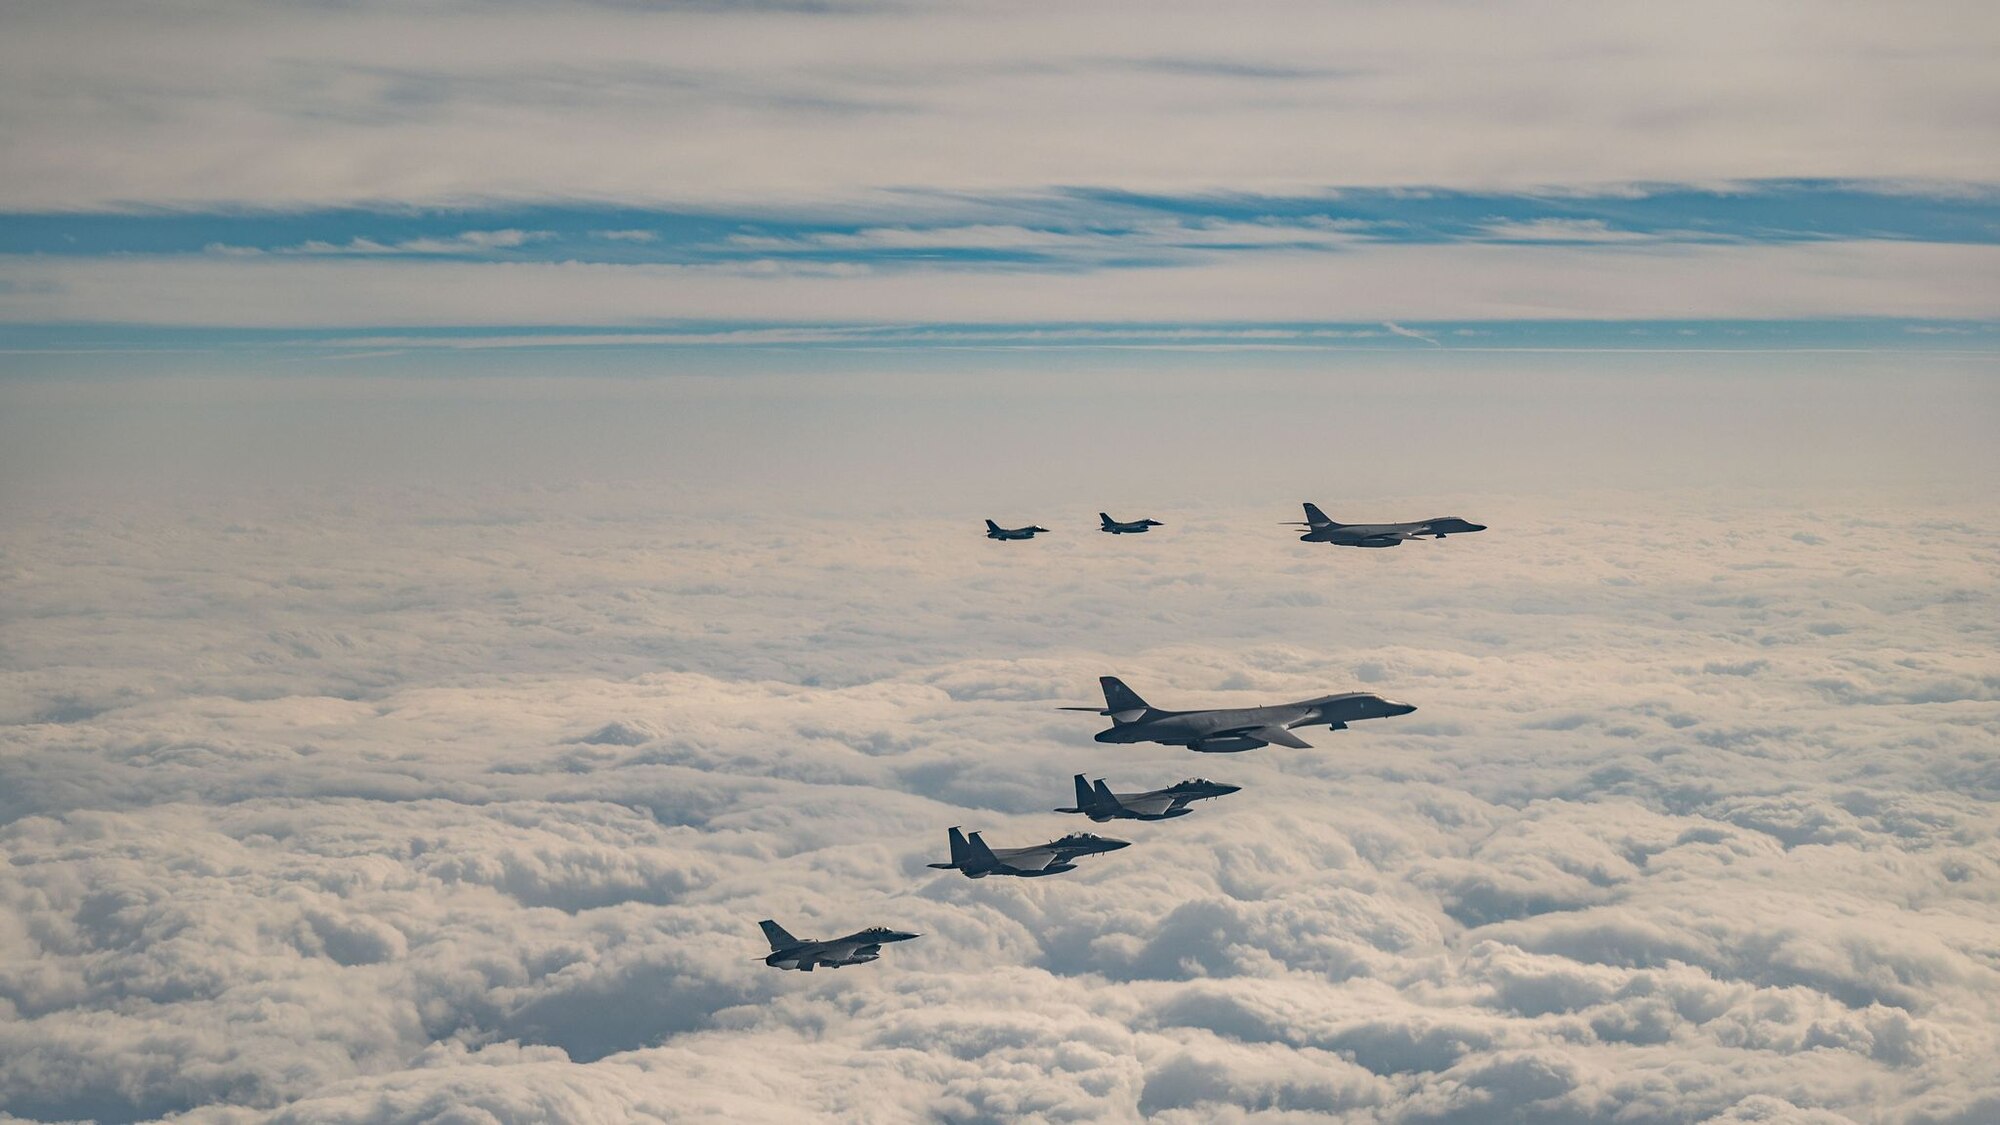 For the second time this year, fighter aircraft from the U.S., Japan, and the Republic of Korea conducted a trilateral escort flight of U.S. bombers operating in the Indo-Pacific, Dec. 20, 2023. U.S. F-16s from the 80th Fighter Squadron, 8th Fighter Wing and 14th Fighter Squadron, 35th Fighter Wing flew alongside Japan Air Self-Defense Force (JASDF) F-2s from the 8th Air Wing, and Republic of Korea Air Force (ROKAF) F-15Ks from the 11th Wing, escorting two U.S. Air Force B-1B Lancers. The continued high-end interoperability of our collective forces demonstrates the strength of the trilateral relationship with our Japan and Republic of Korea allies. Our international cooperation is reflective of our shared values and resolve against those who challenge regional stability. We remain committed to peace and prosperity in the region to uphold a free and open Indo-Pacific.